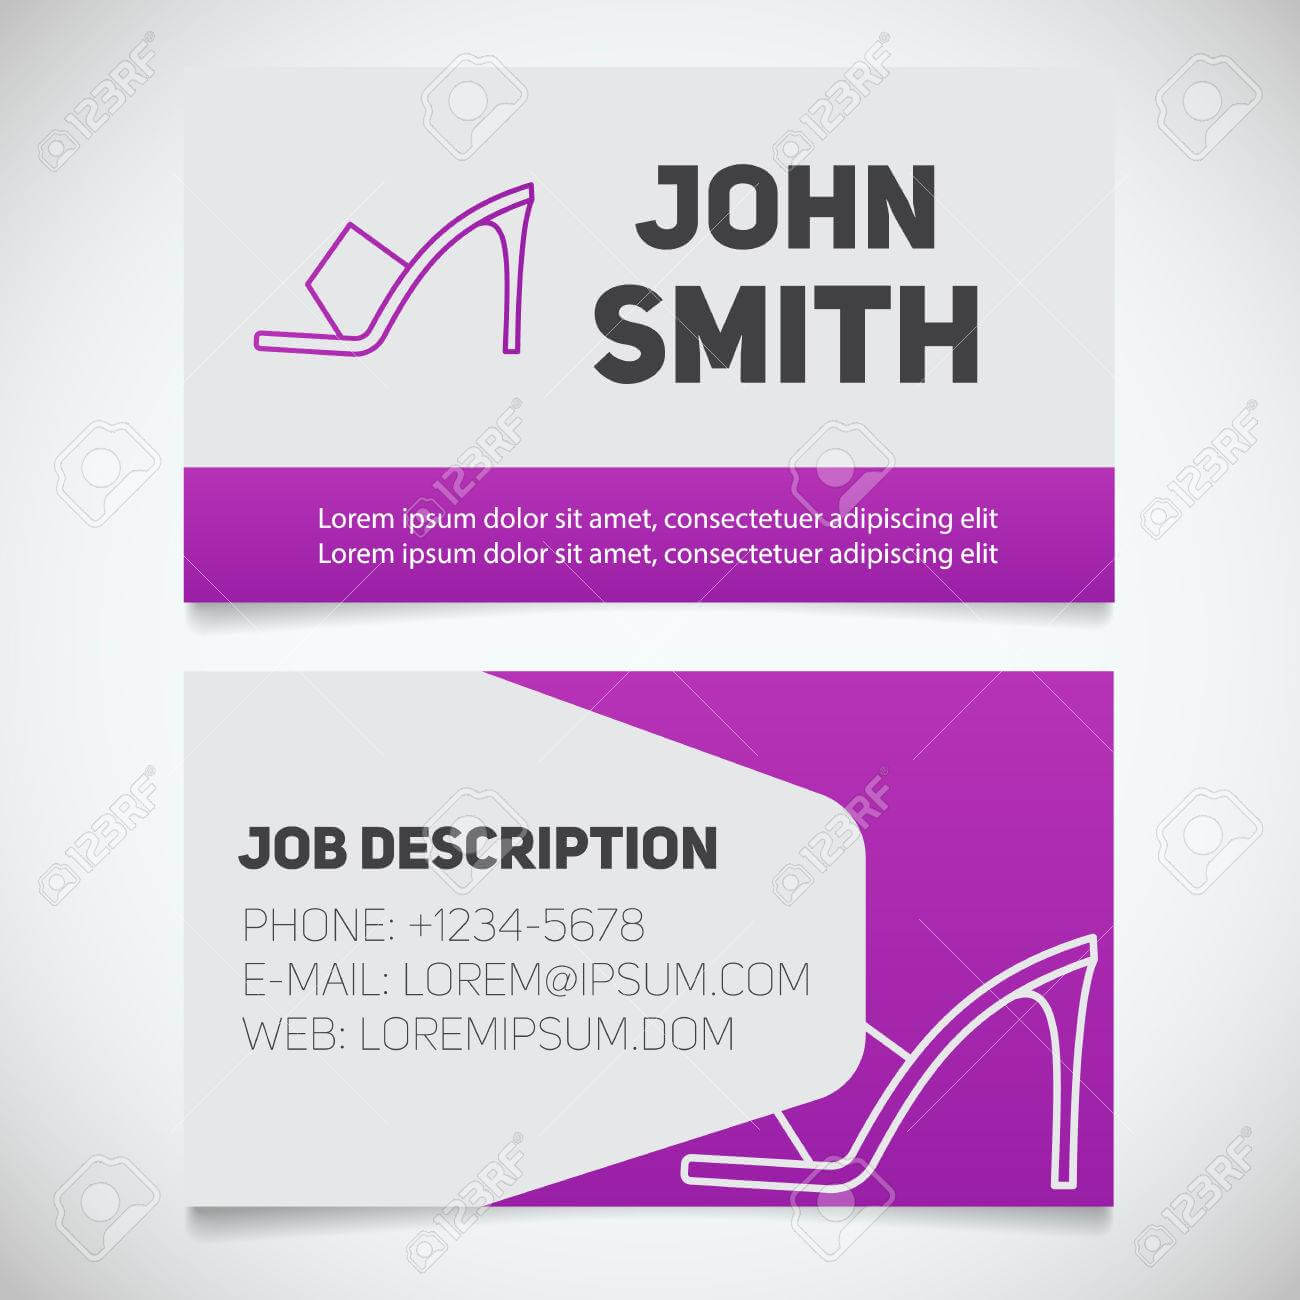 Business Card Print Template With High Heel Shoe Logo. Manager With High Heel Template For Cards